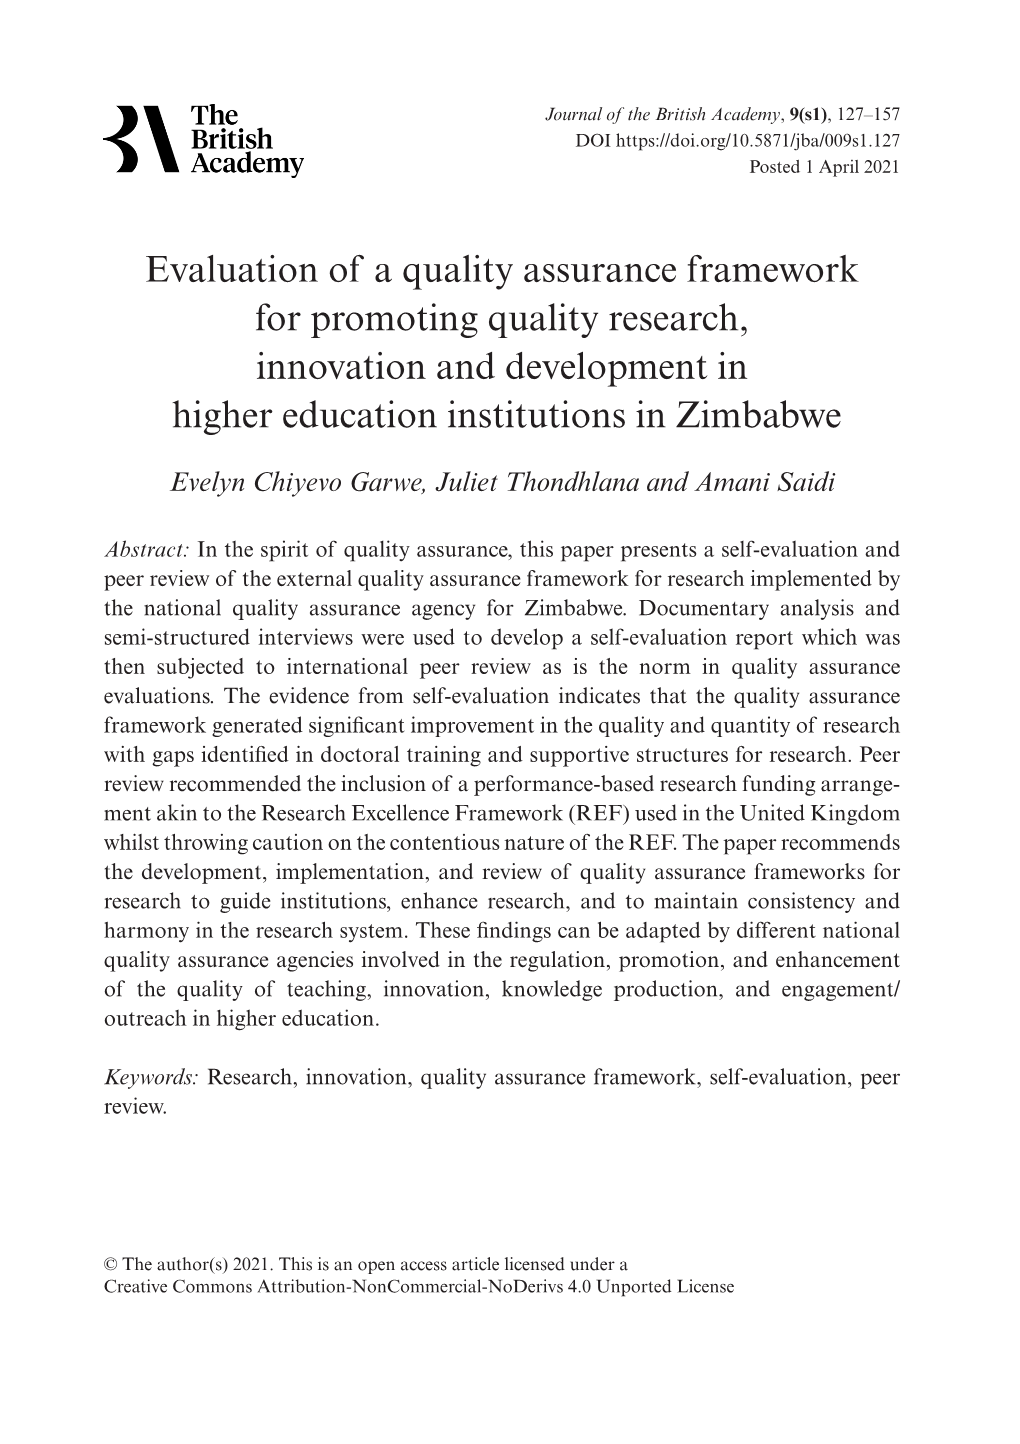 Evaluation of a Quality Assurance Framework for Promoting Quality Research, Innovation and Development in Higher Education Institutions in Zimbabwe